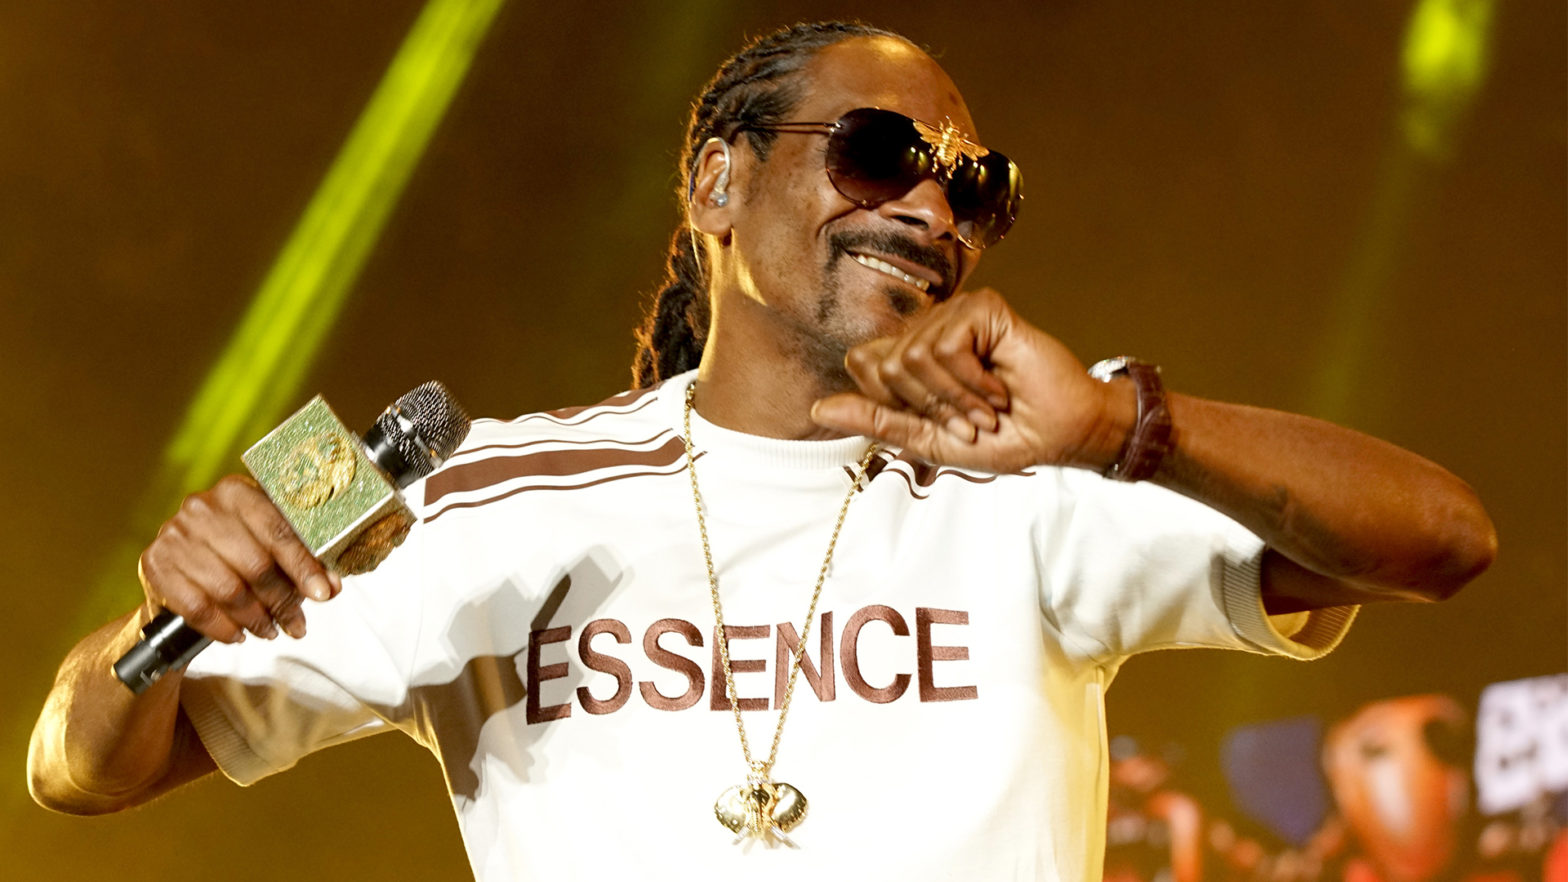 Lessons From Uncle Snoop: A Look Into How Snoop Dogg Built His Massive $150M Empire